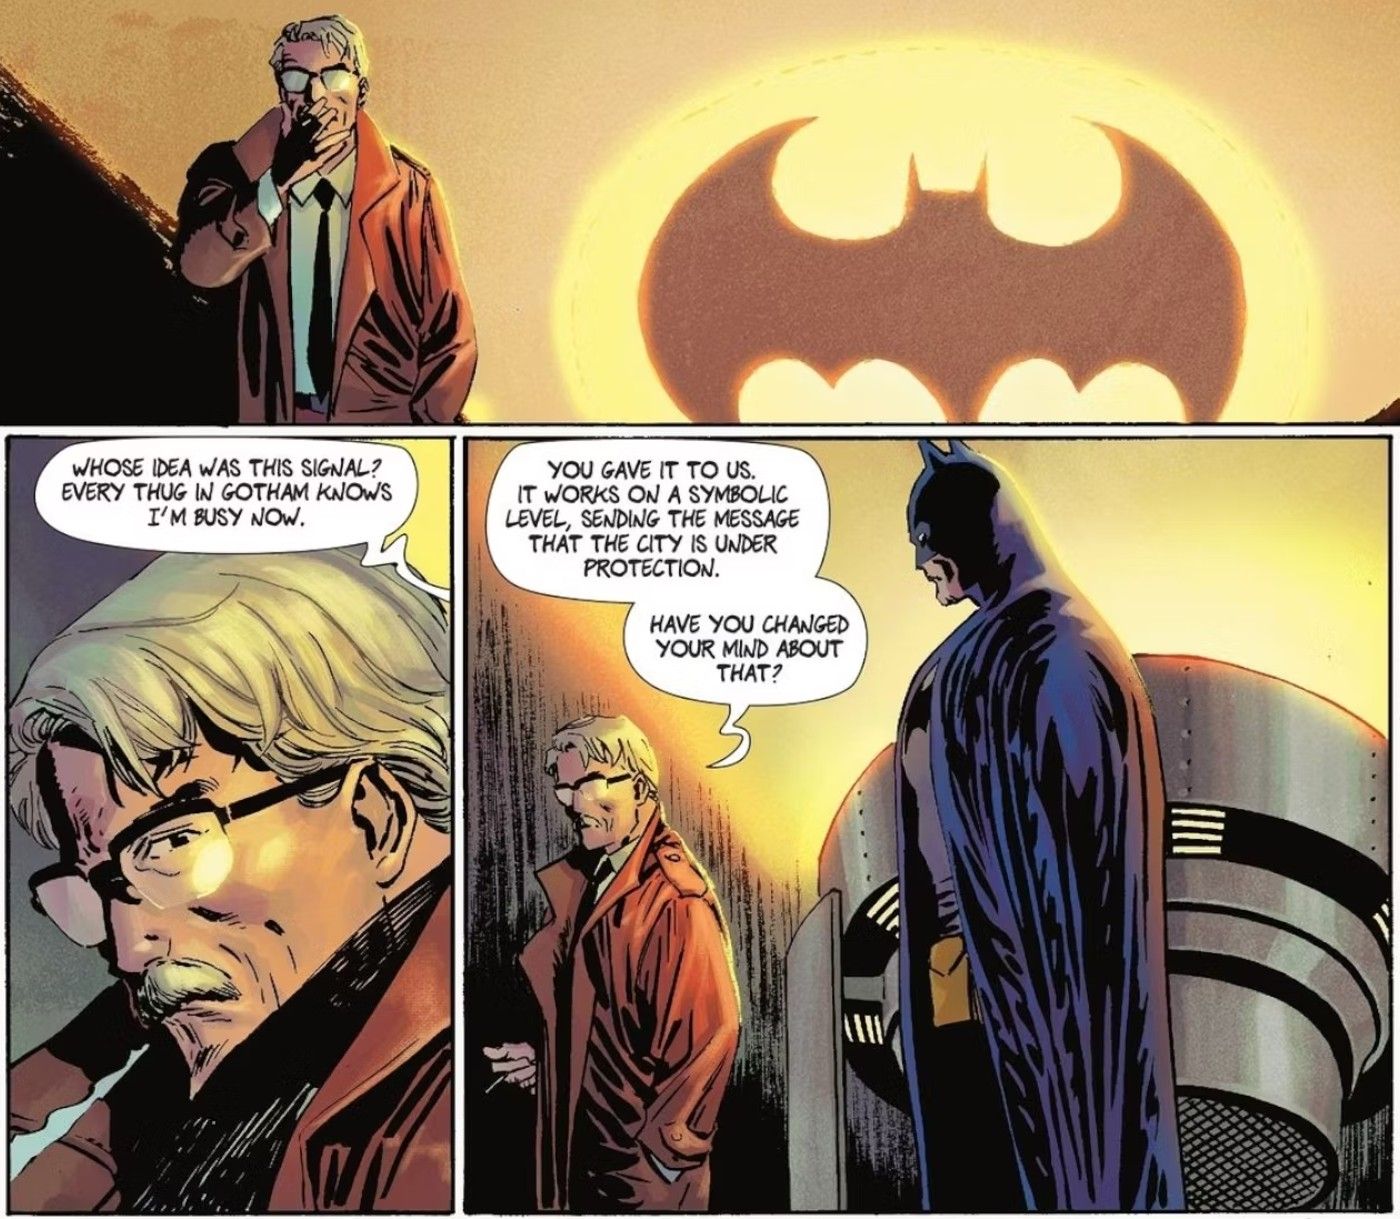 Comic book panels: an older man (Commissioner Gordon) stands in front of the yellow Bat-Signal as he talks to Batman.